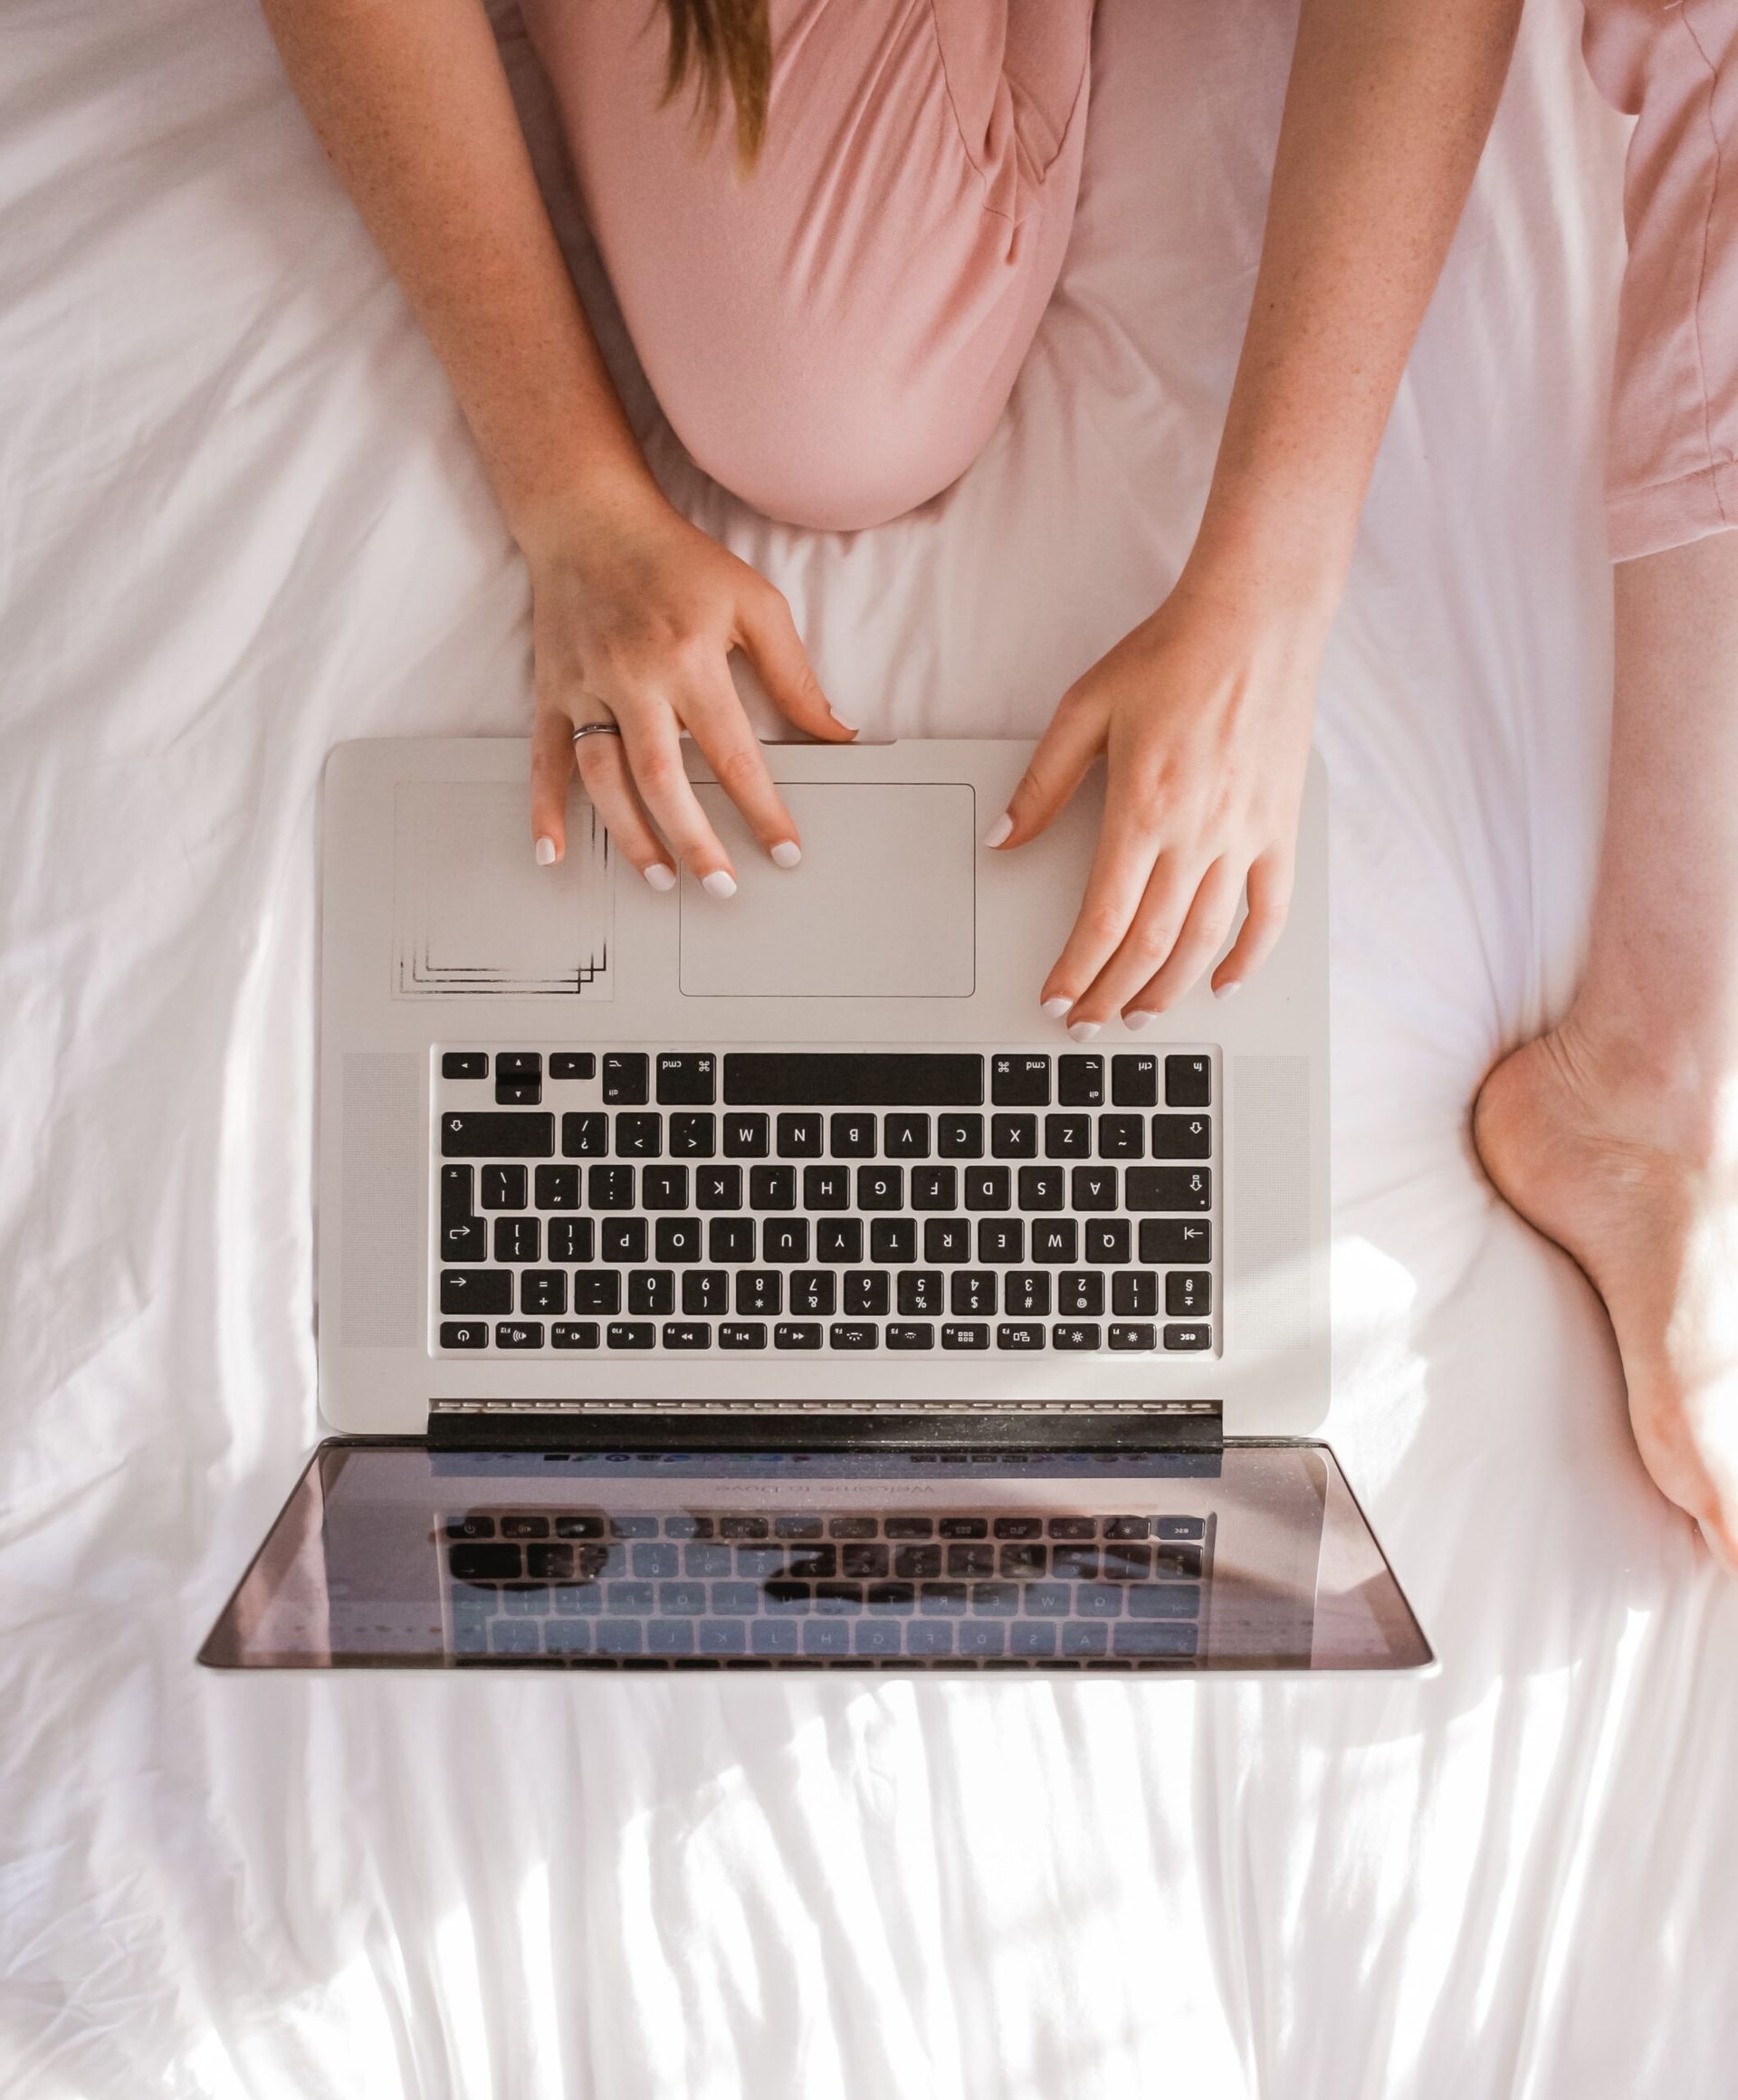 a woman is sitting on a bed using a laptop computer